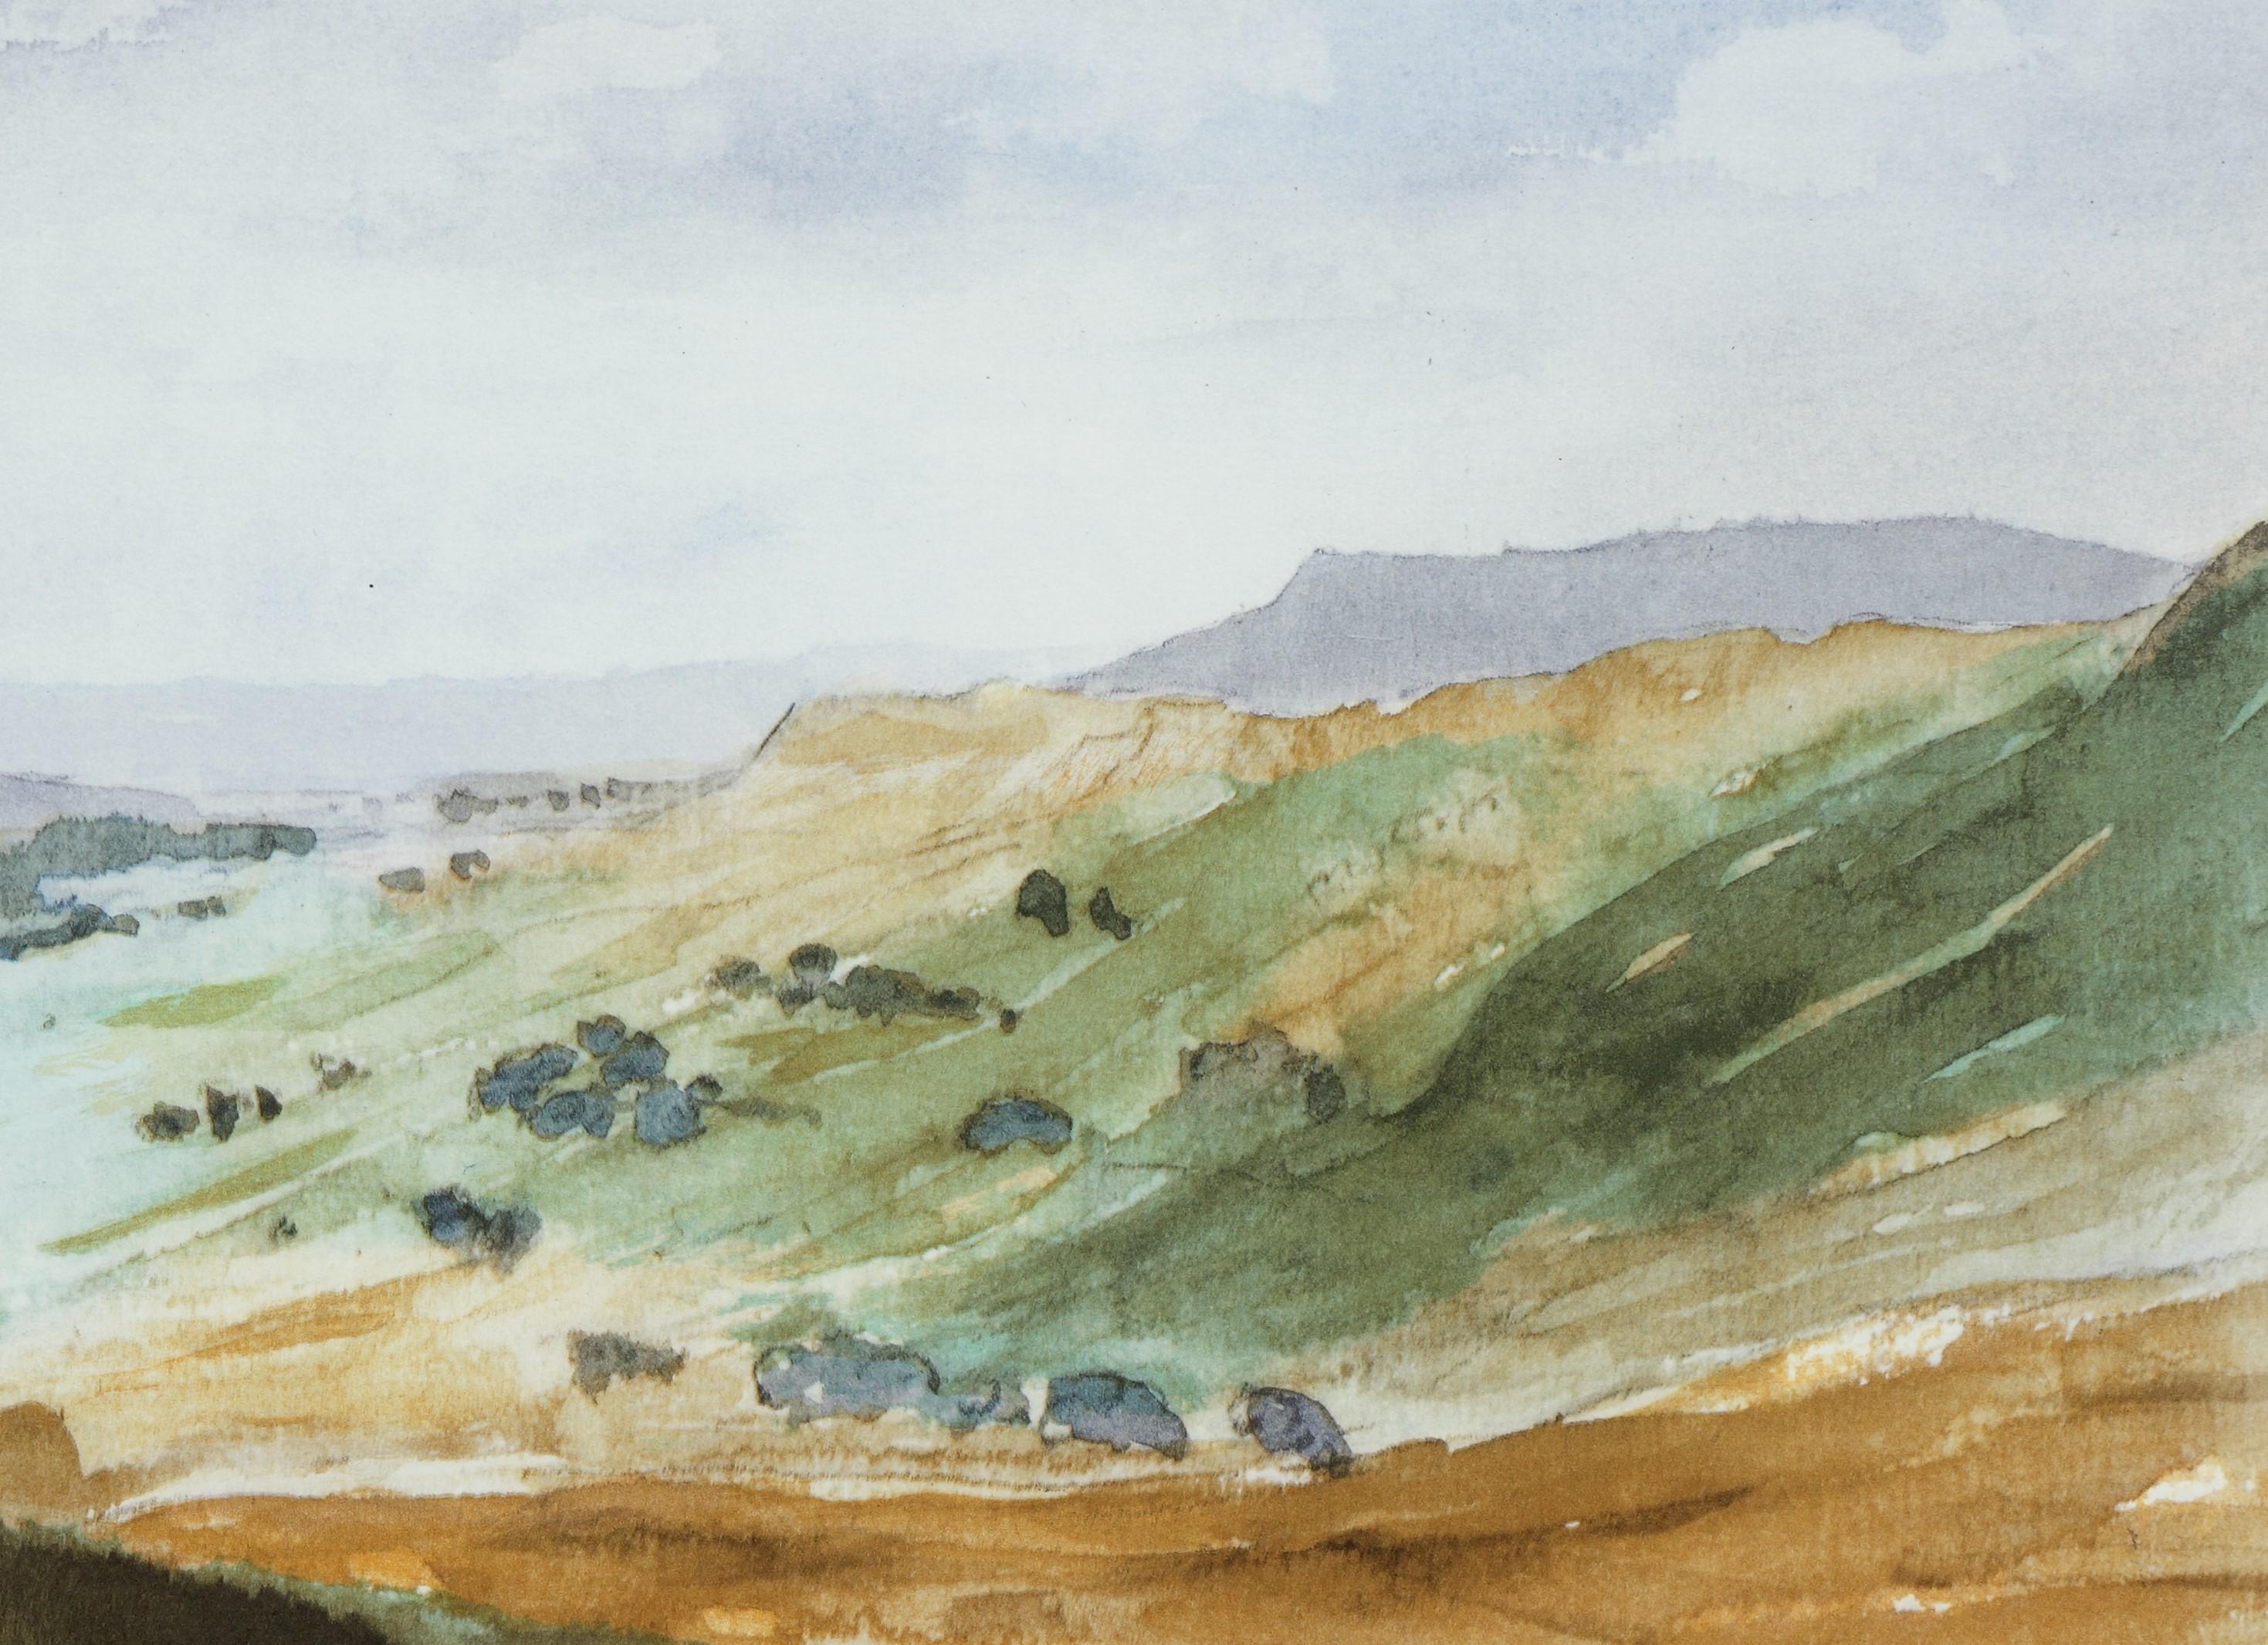 Wensleydale - Signed Lithograph, Royal Art, Yorkshire, British Landscape, Dales - Print by His Majesty King Charles III